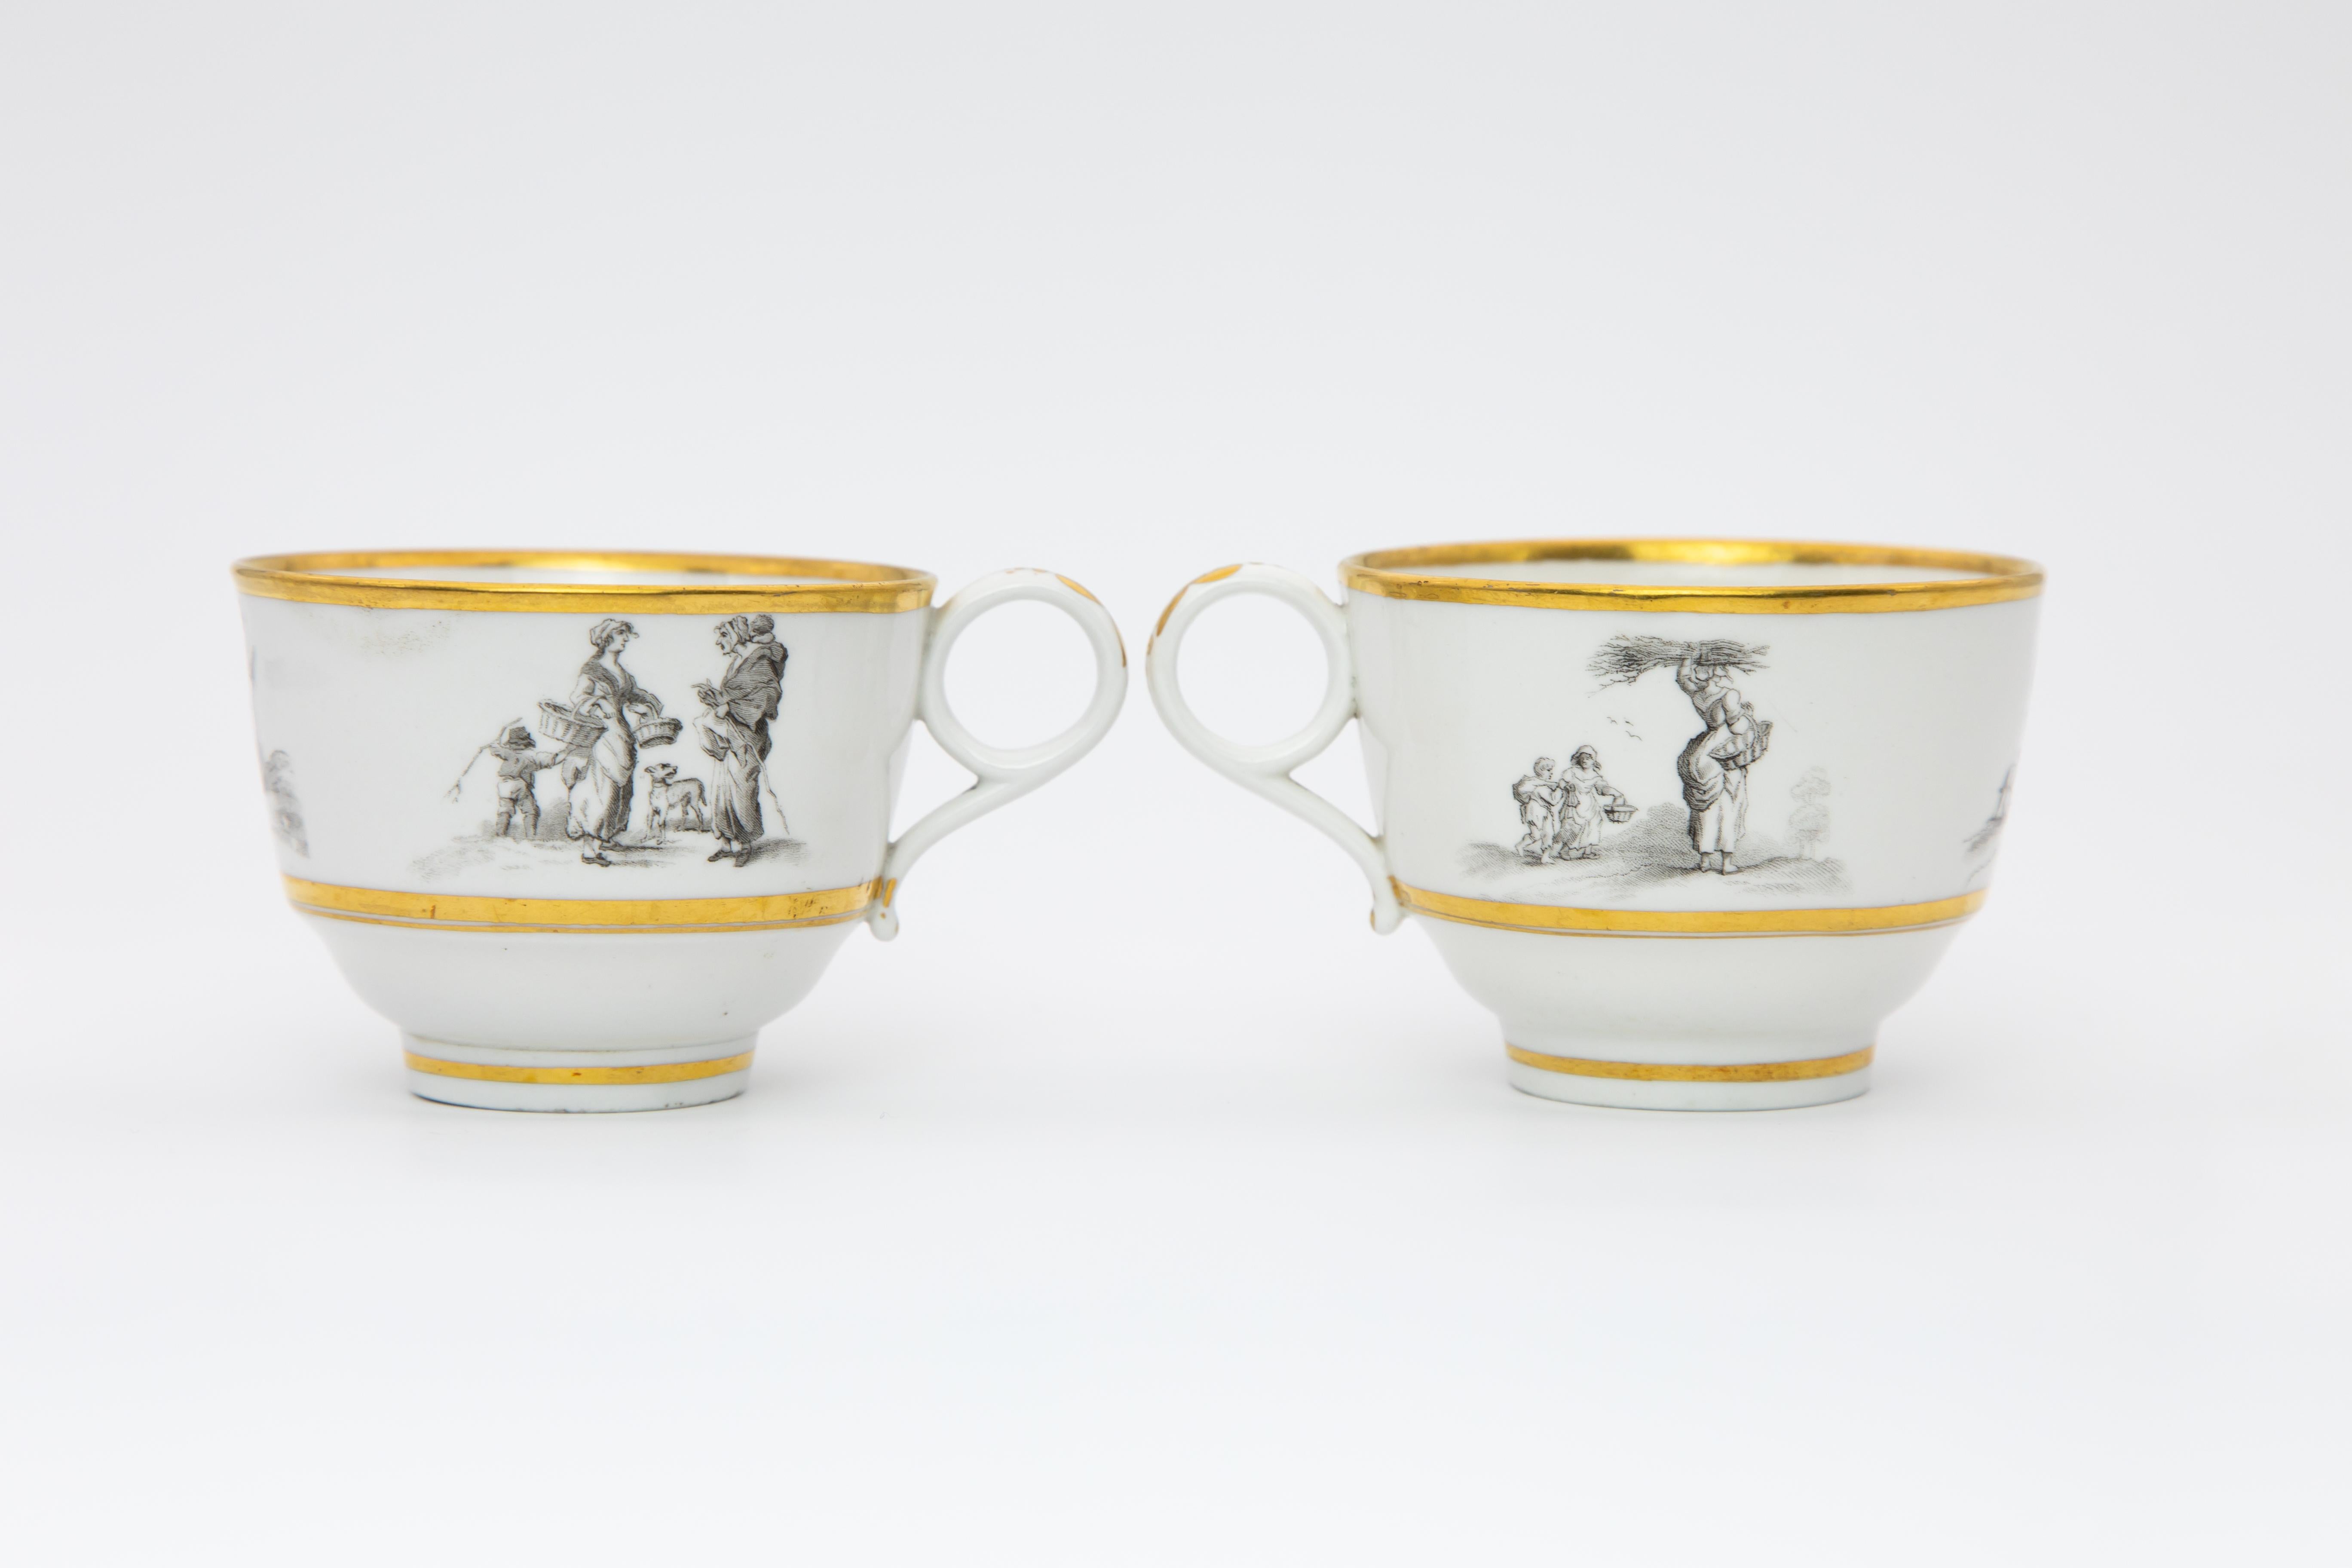 Pair of Early Barr Flight Barr Porcelain Teacups and Saucers For Sale 2